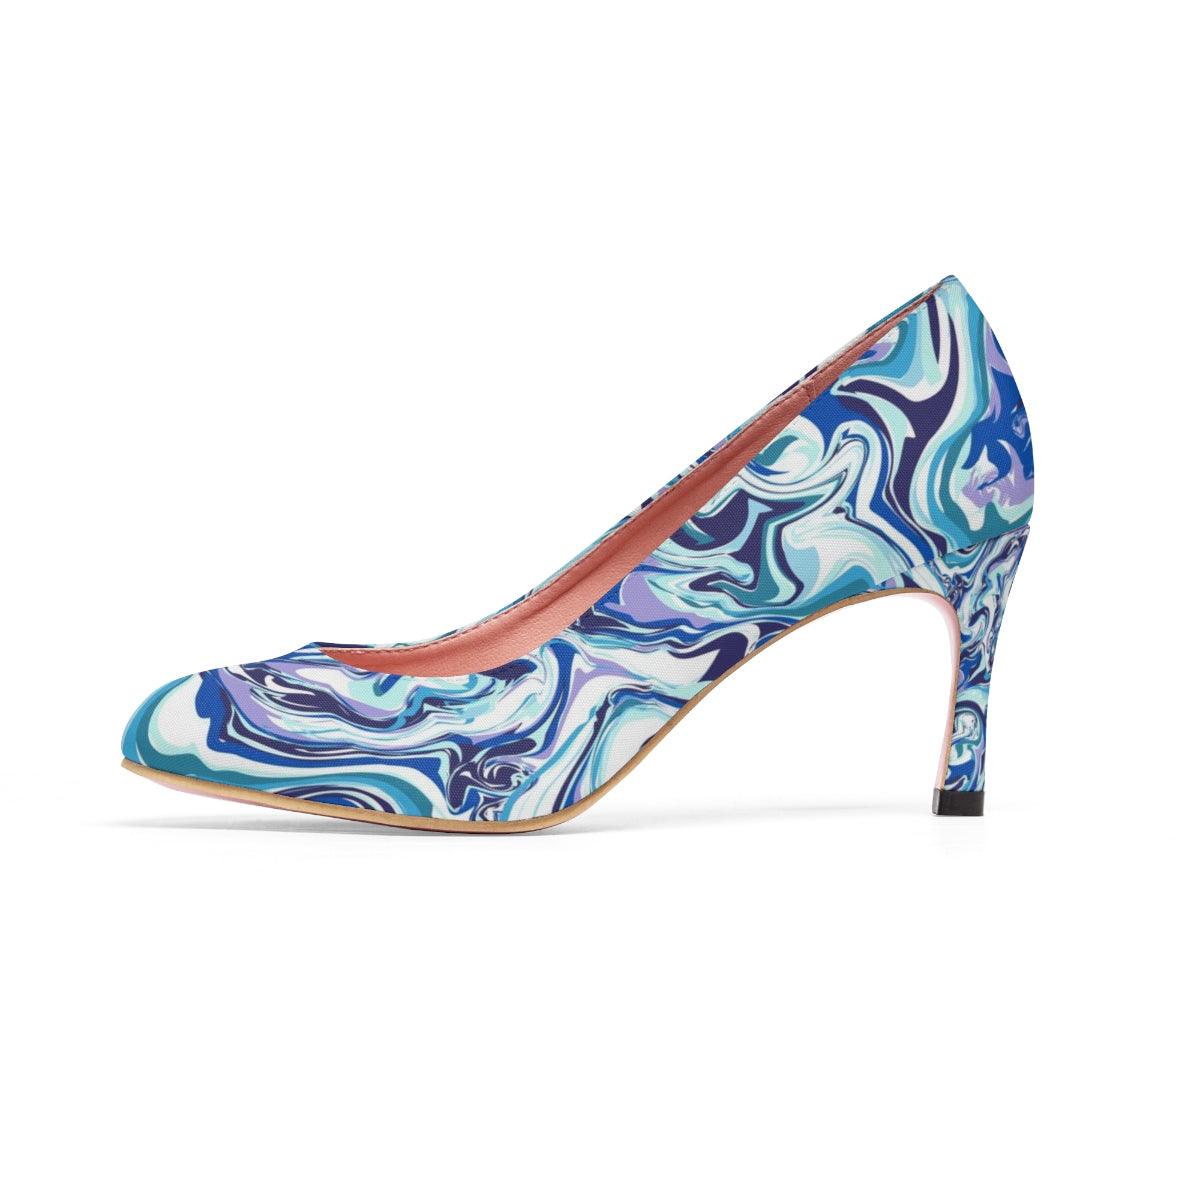 Blue Marble Women's High Heels - Buyashoes